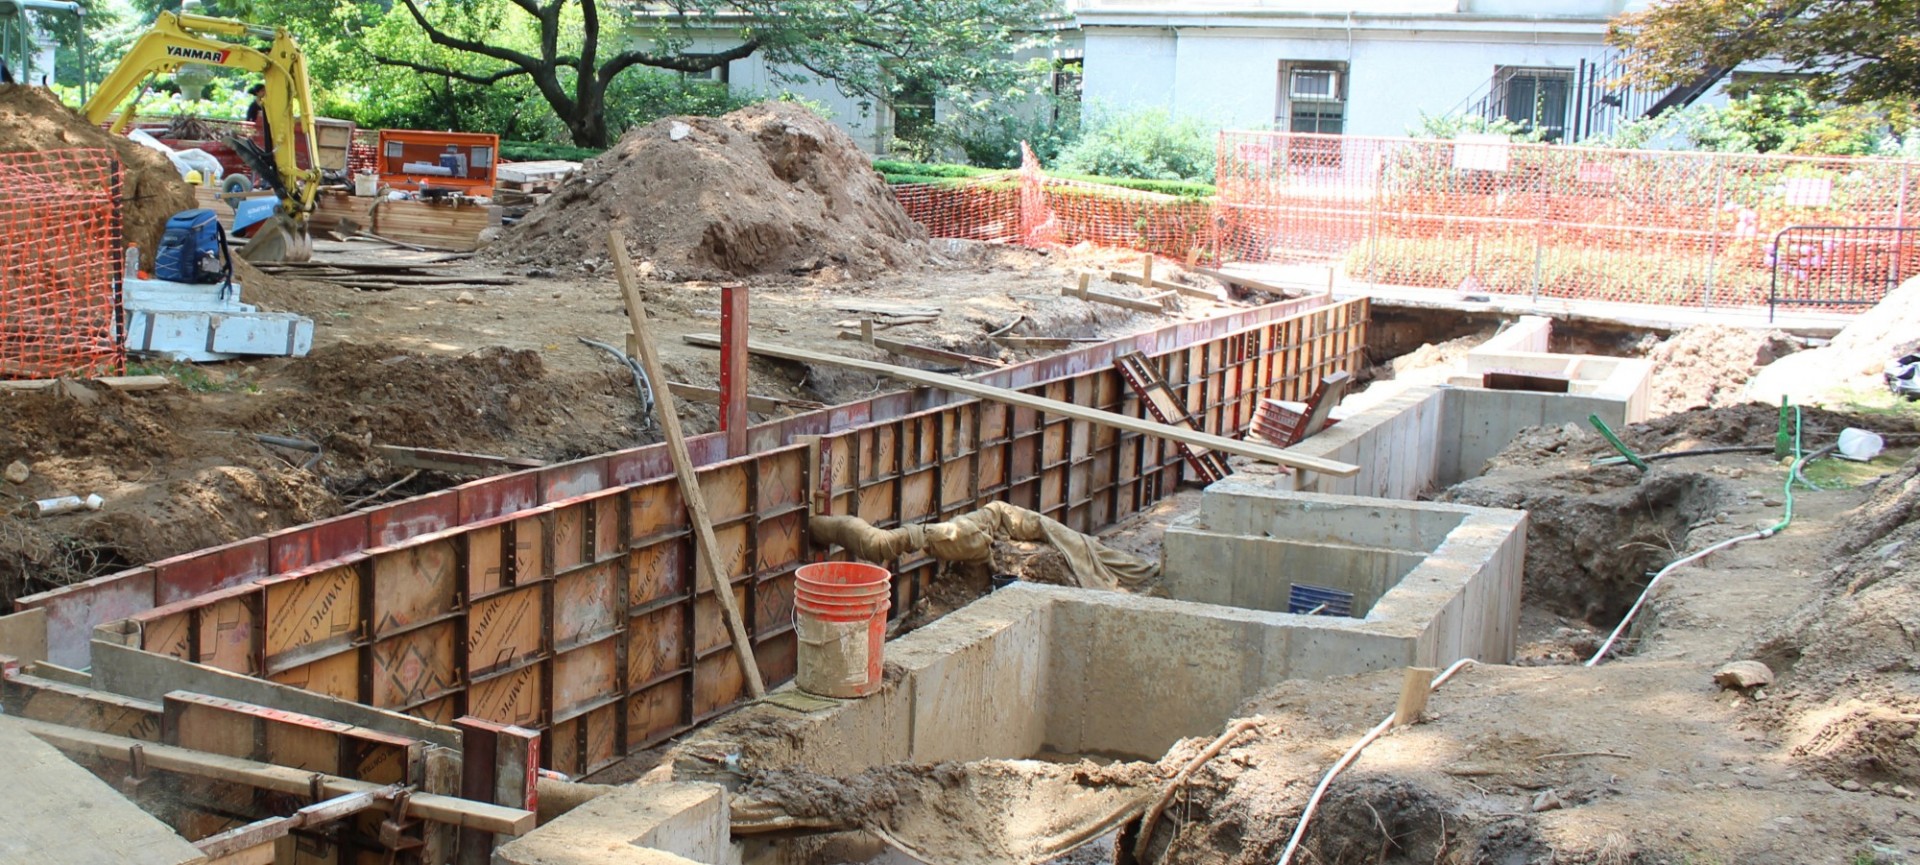 An area excavated lawn with mini concrete walls for construction.